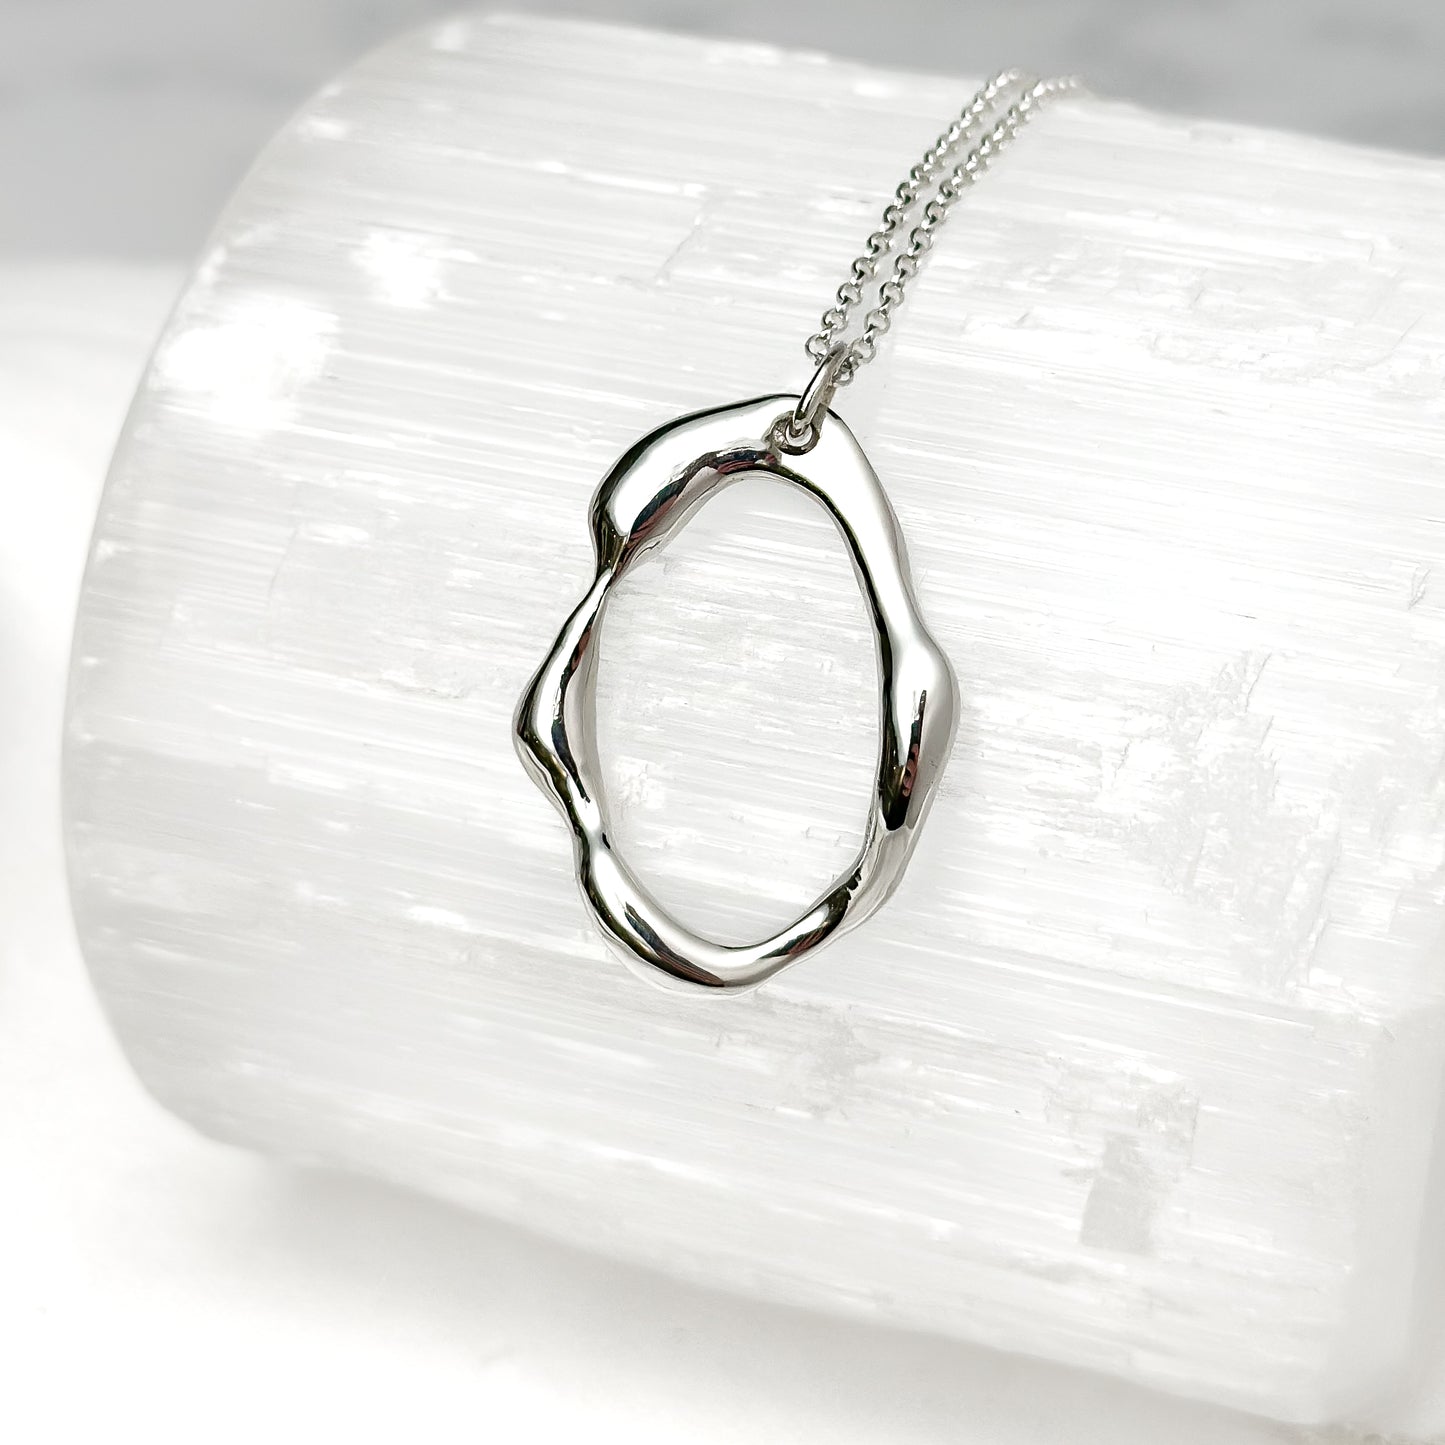 One of a Kind Molten Sterling Silver Necklace - No. 1